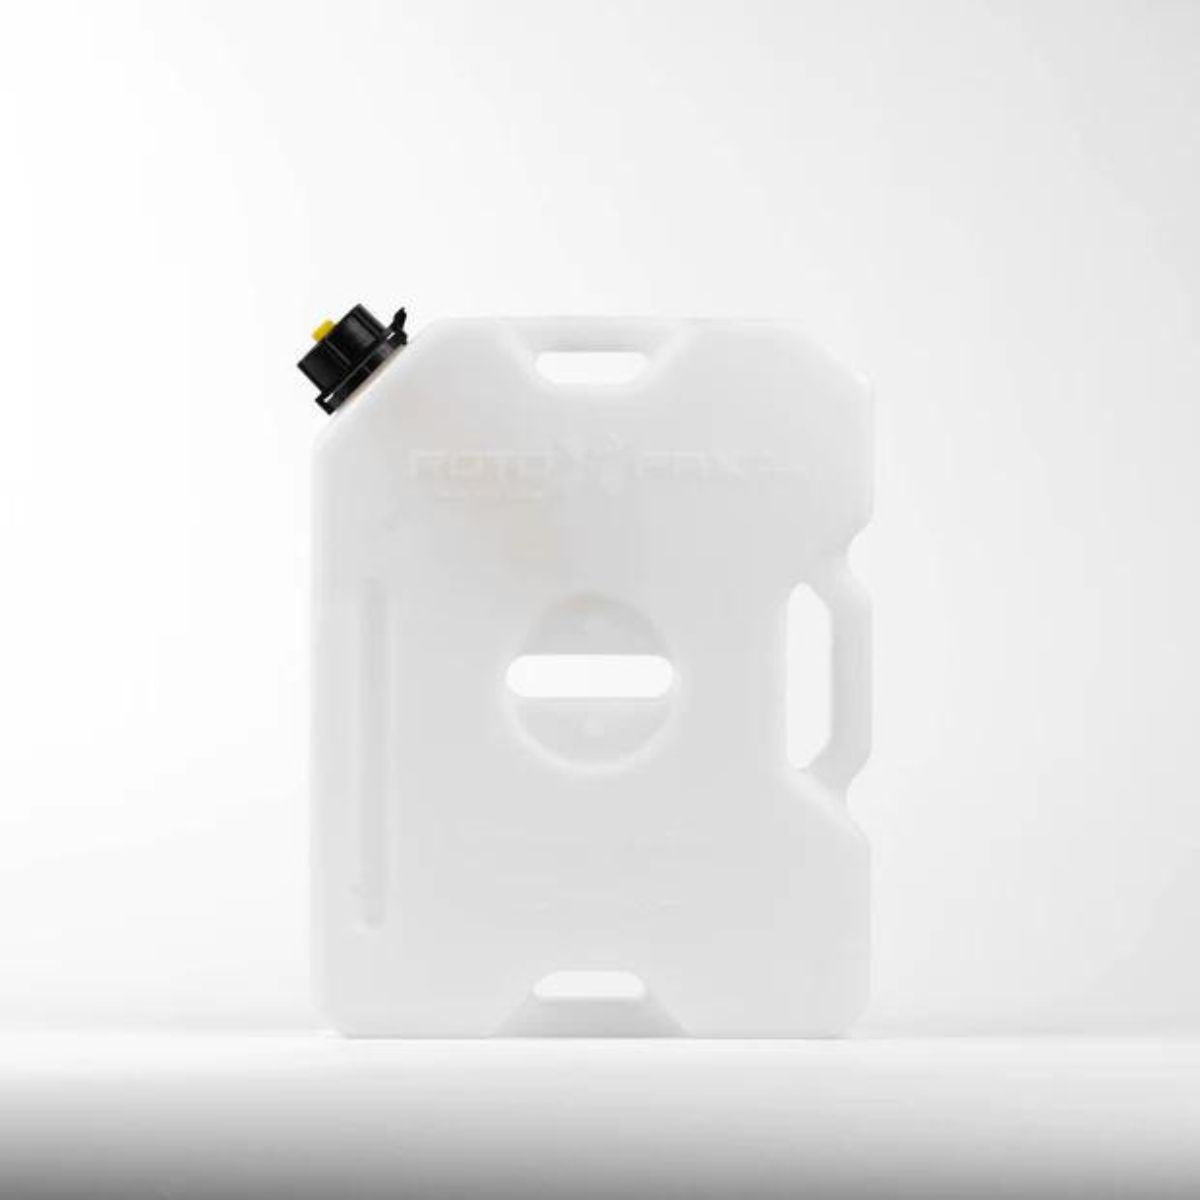 RotoPax RXX-2W 2nd Gen 2 Gallon Water Container - White